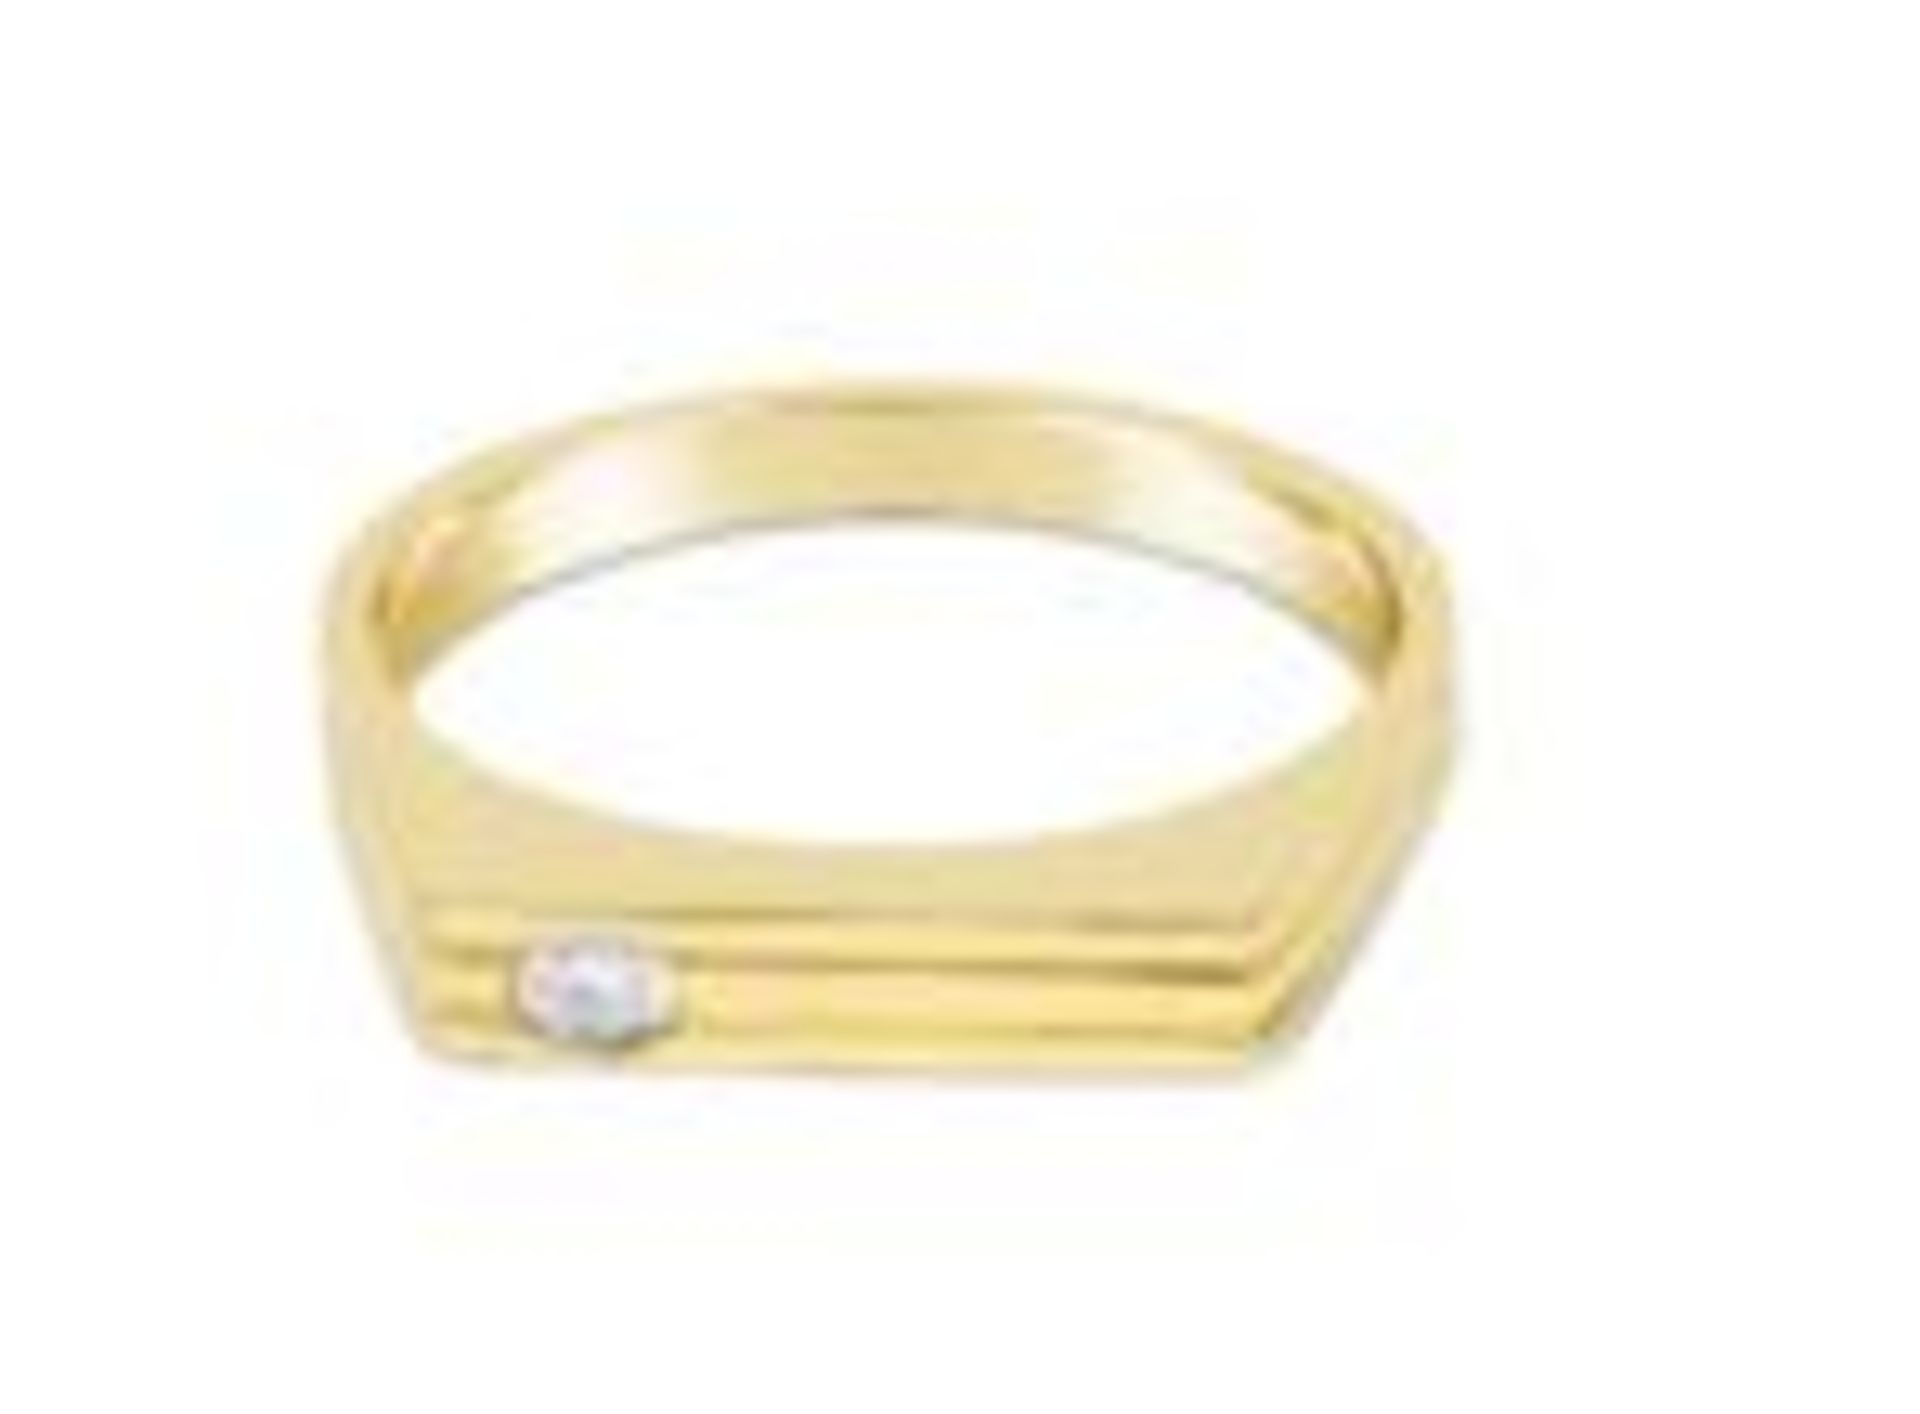 Diamond Ring, 9ct Yellow Gold, Weight 3.19g, Diamond Weight 0.08ct, Colour H, Clarity SI1 - SI2,